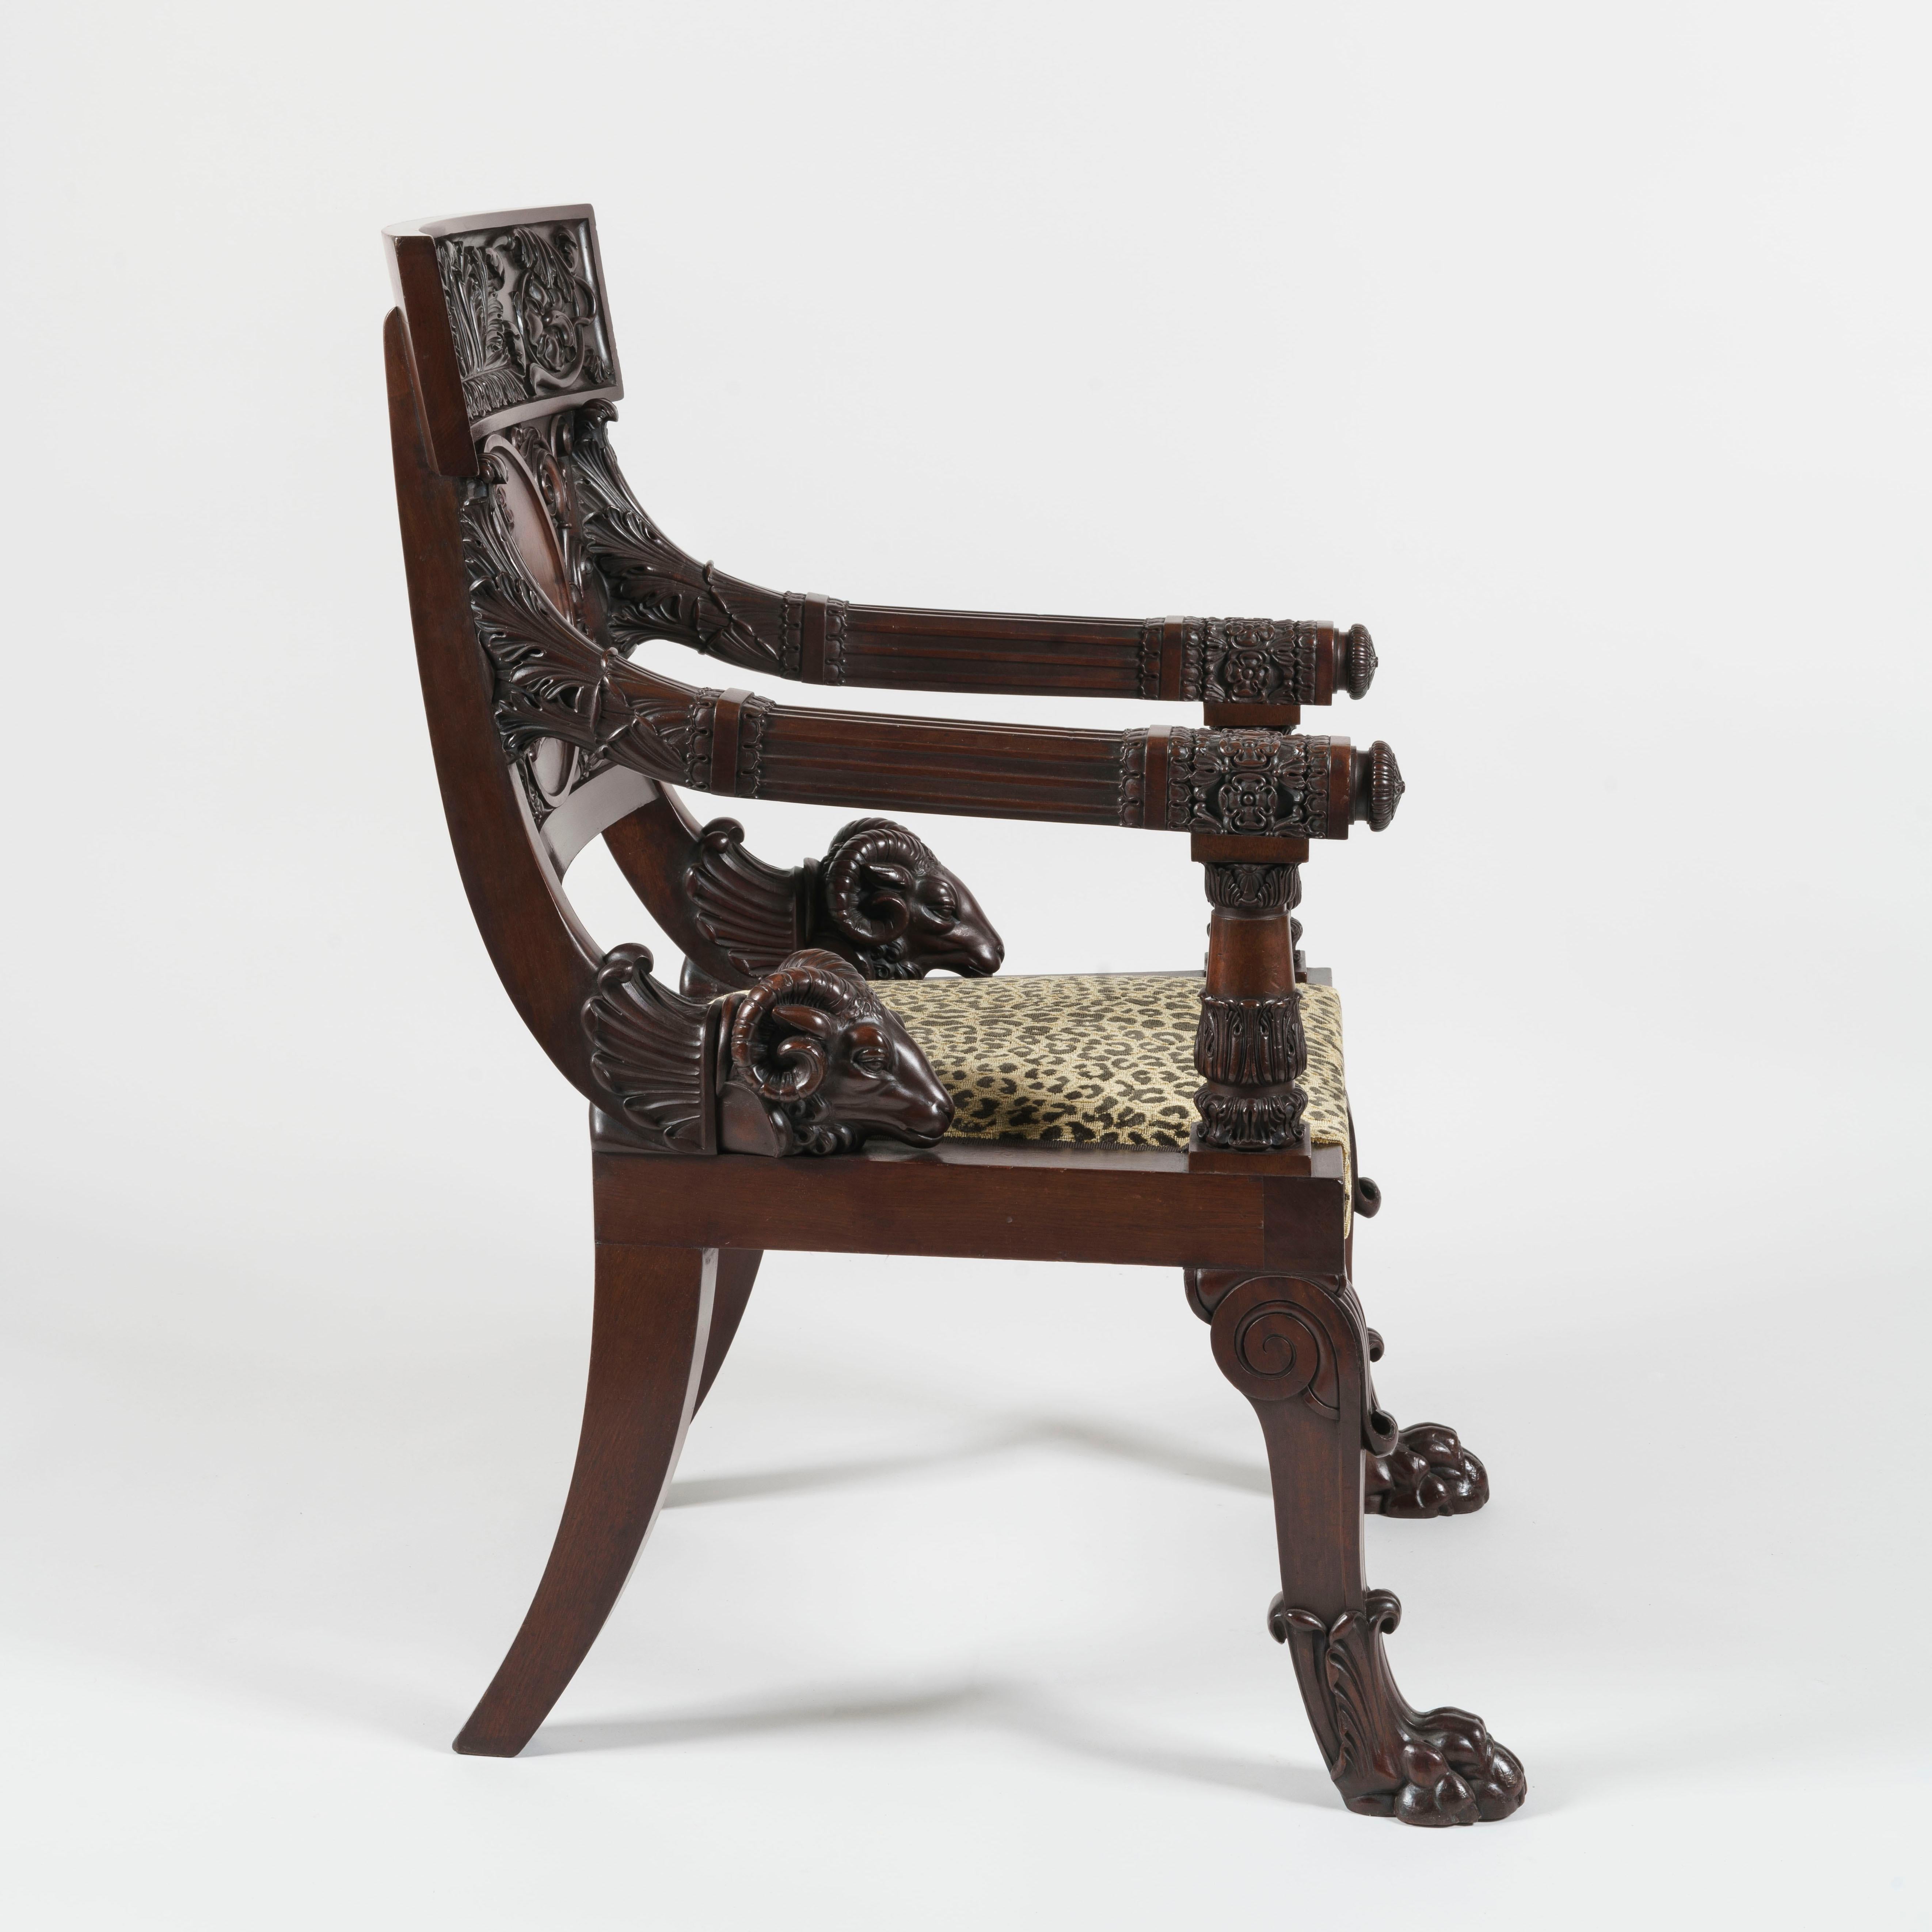 A pair of Klismos armchairs of important size
After a design by Thomas Hope

Constructed in a finely patinated Cuban mahogany, dressed with the carved Burnell family crest; rising from claw footed swept and lapetted legs, with sabre legs to the